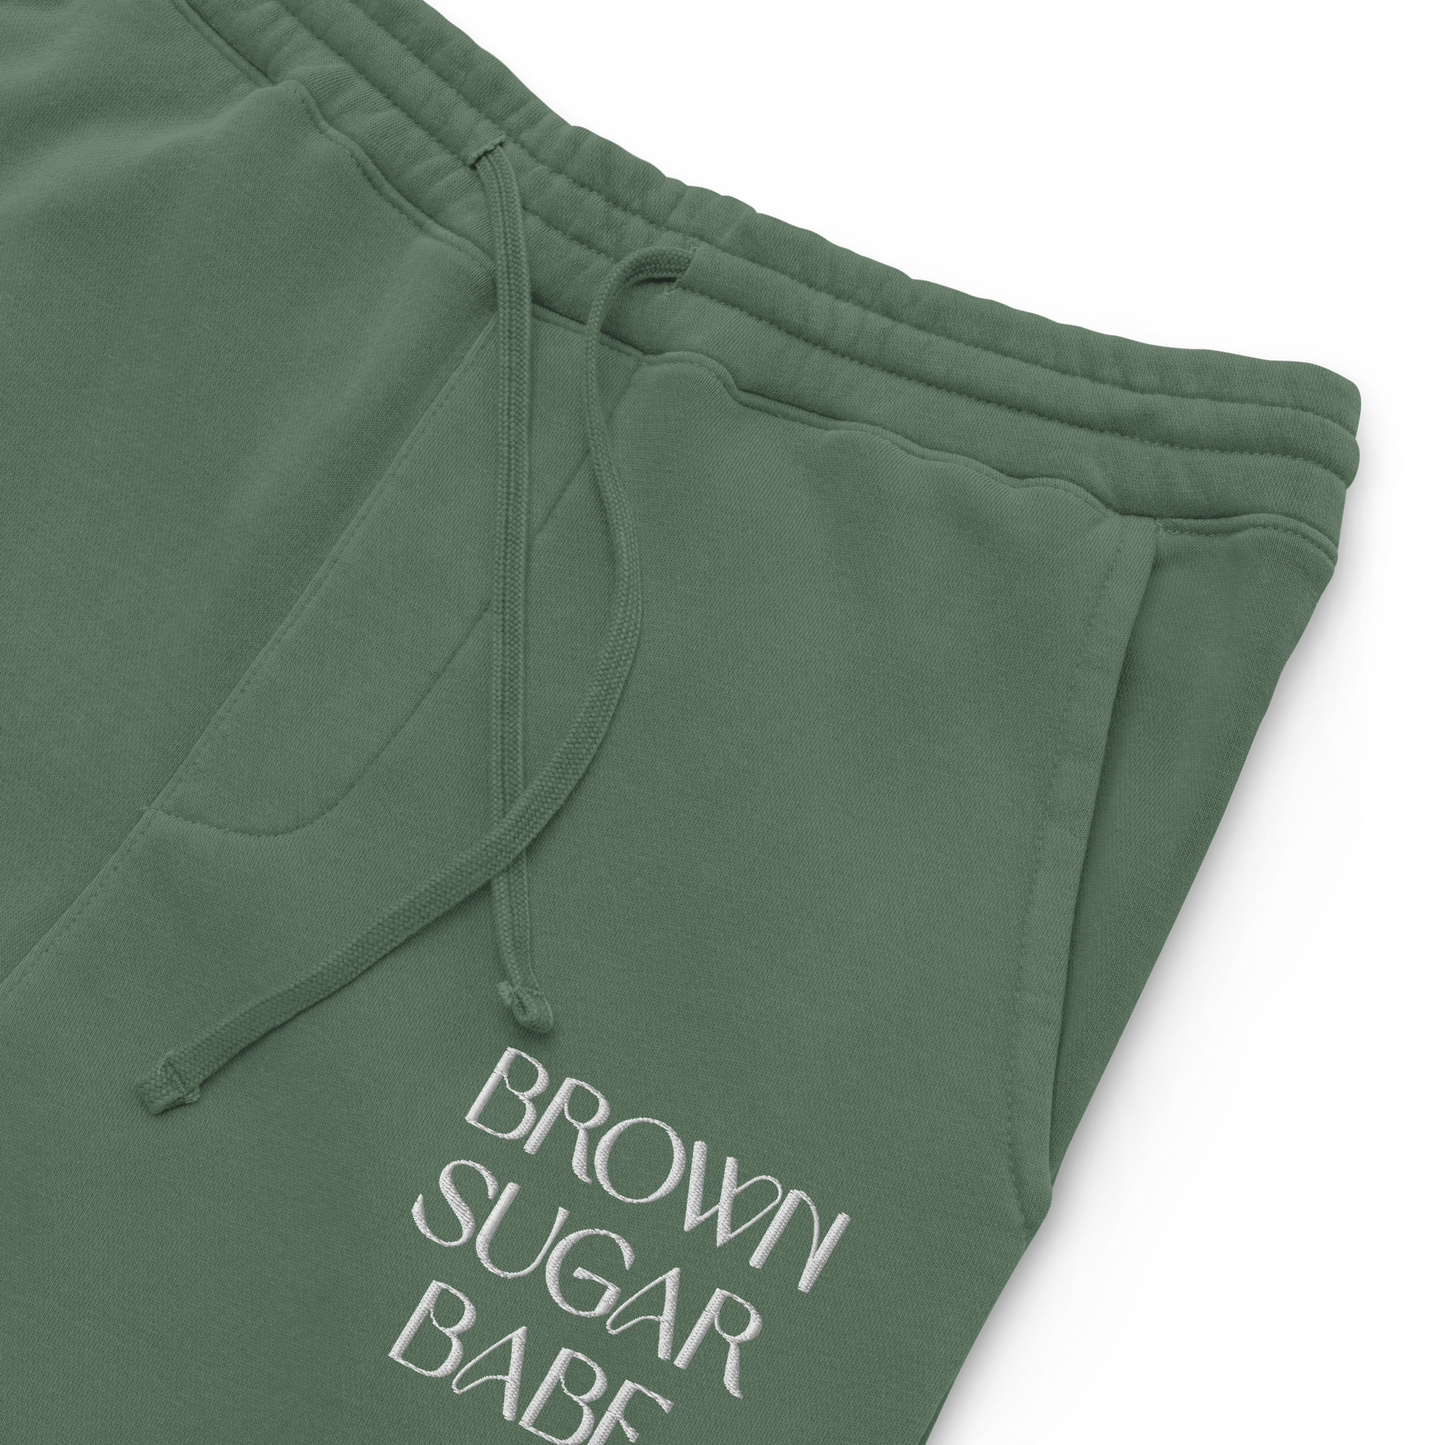 Brown Sugar Babe Pigment-Dyed Sweatpants